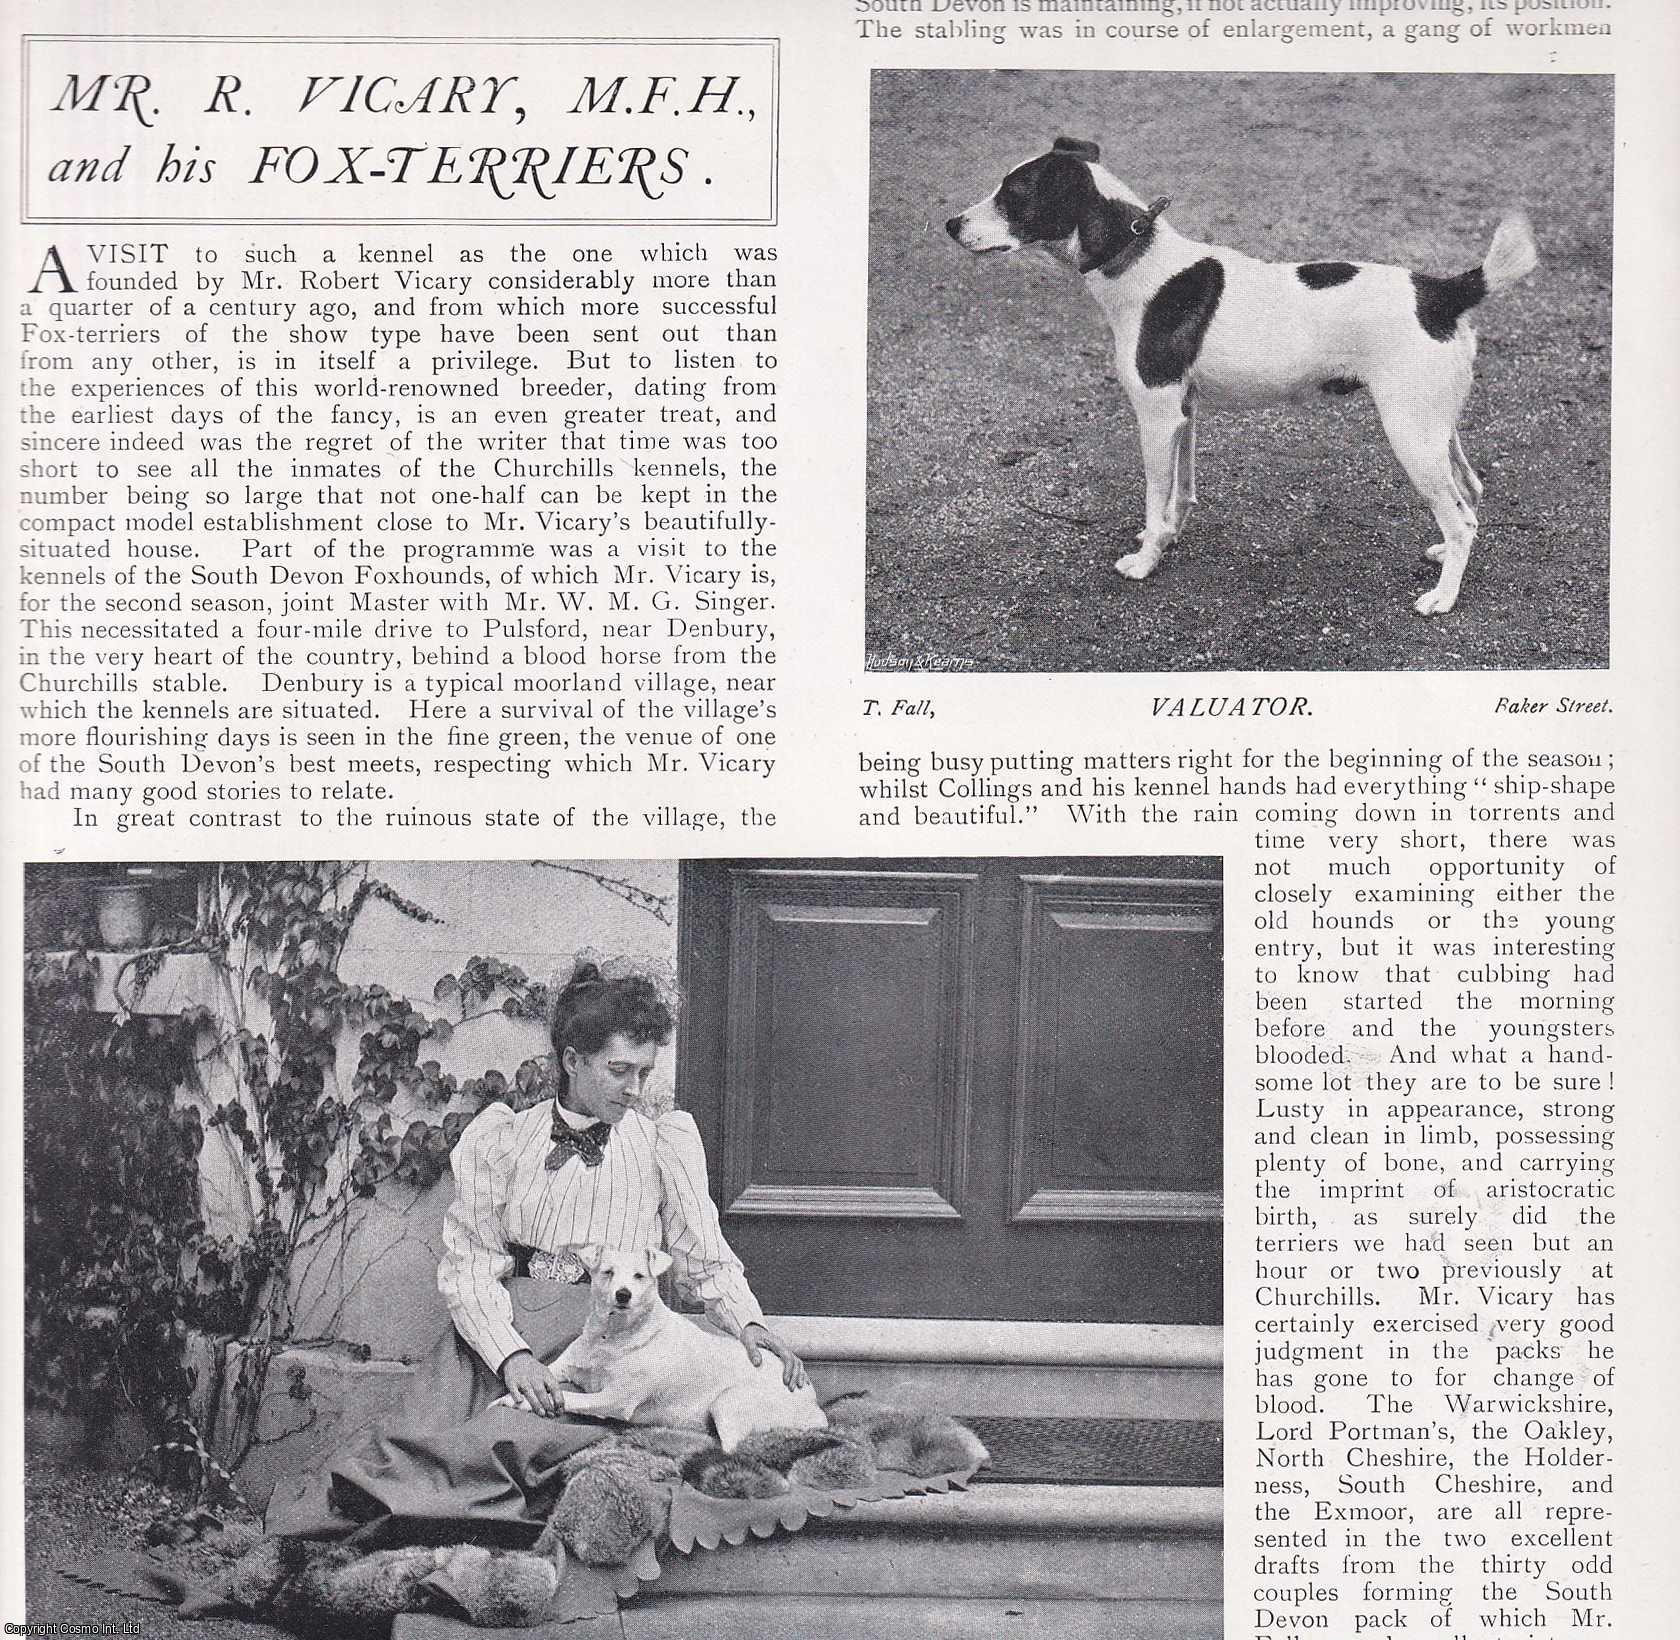 FOX HUNTING - Mr R Vicary, M.F.H. of the South Devon Hunt, and His Fox-Terriers. Several pictures and accompanying text, removed from an original issue of Country Life Magazine, 1898.